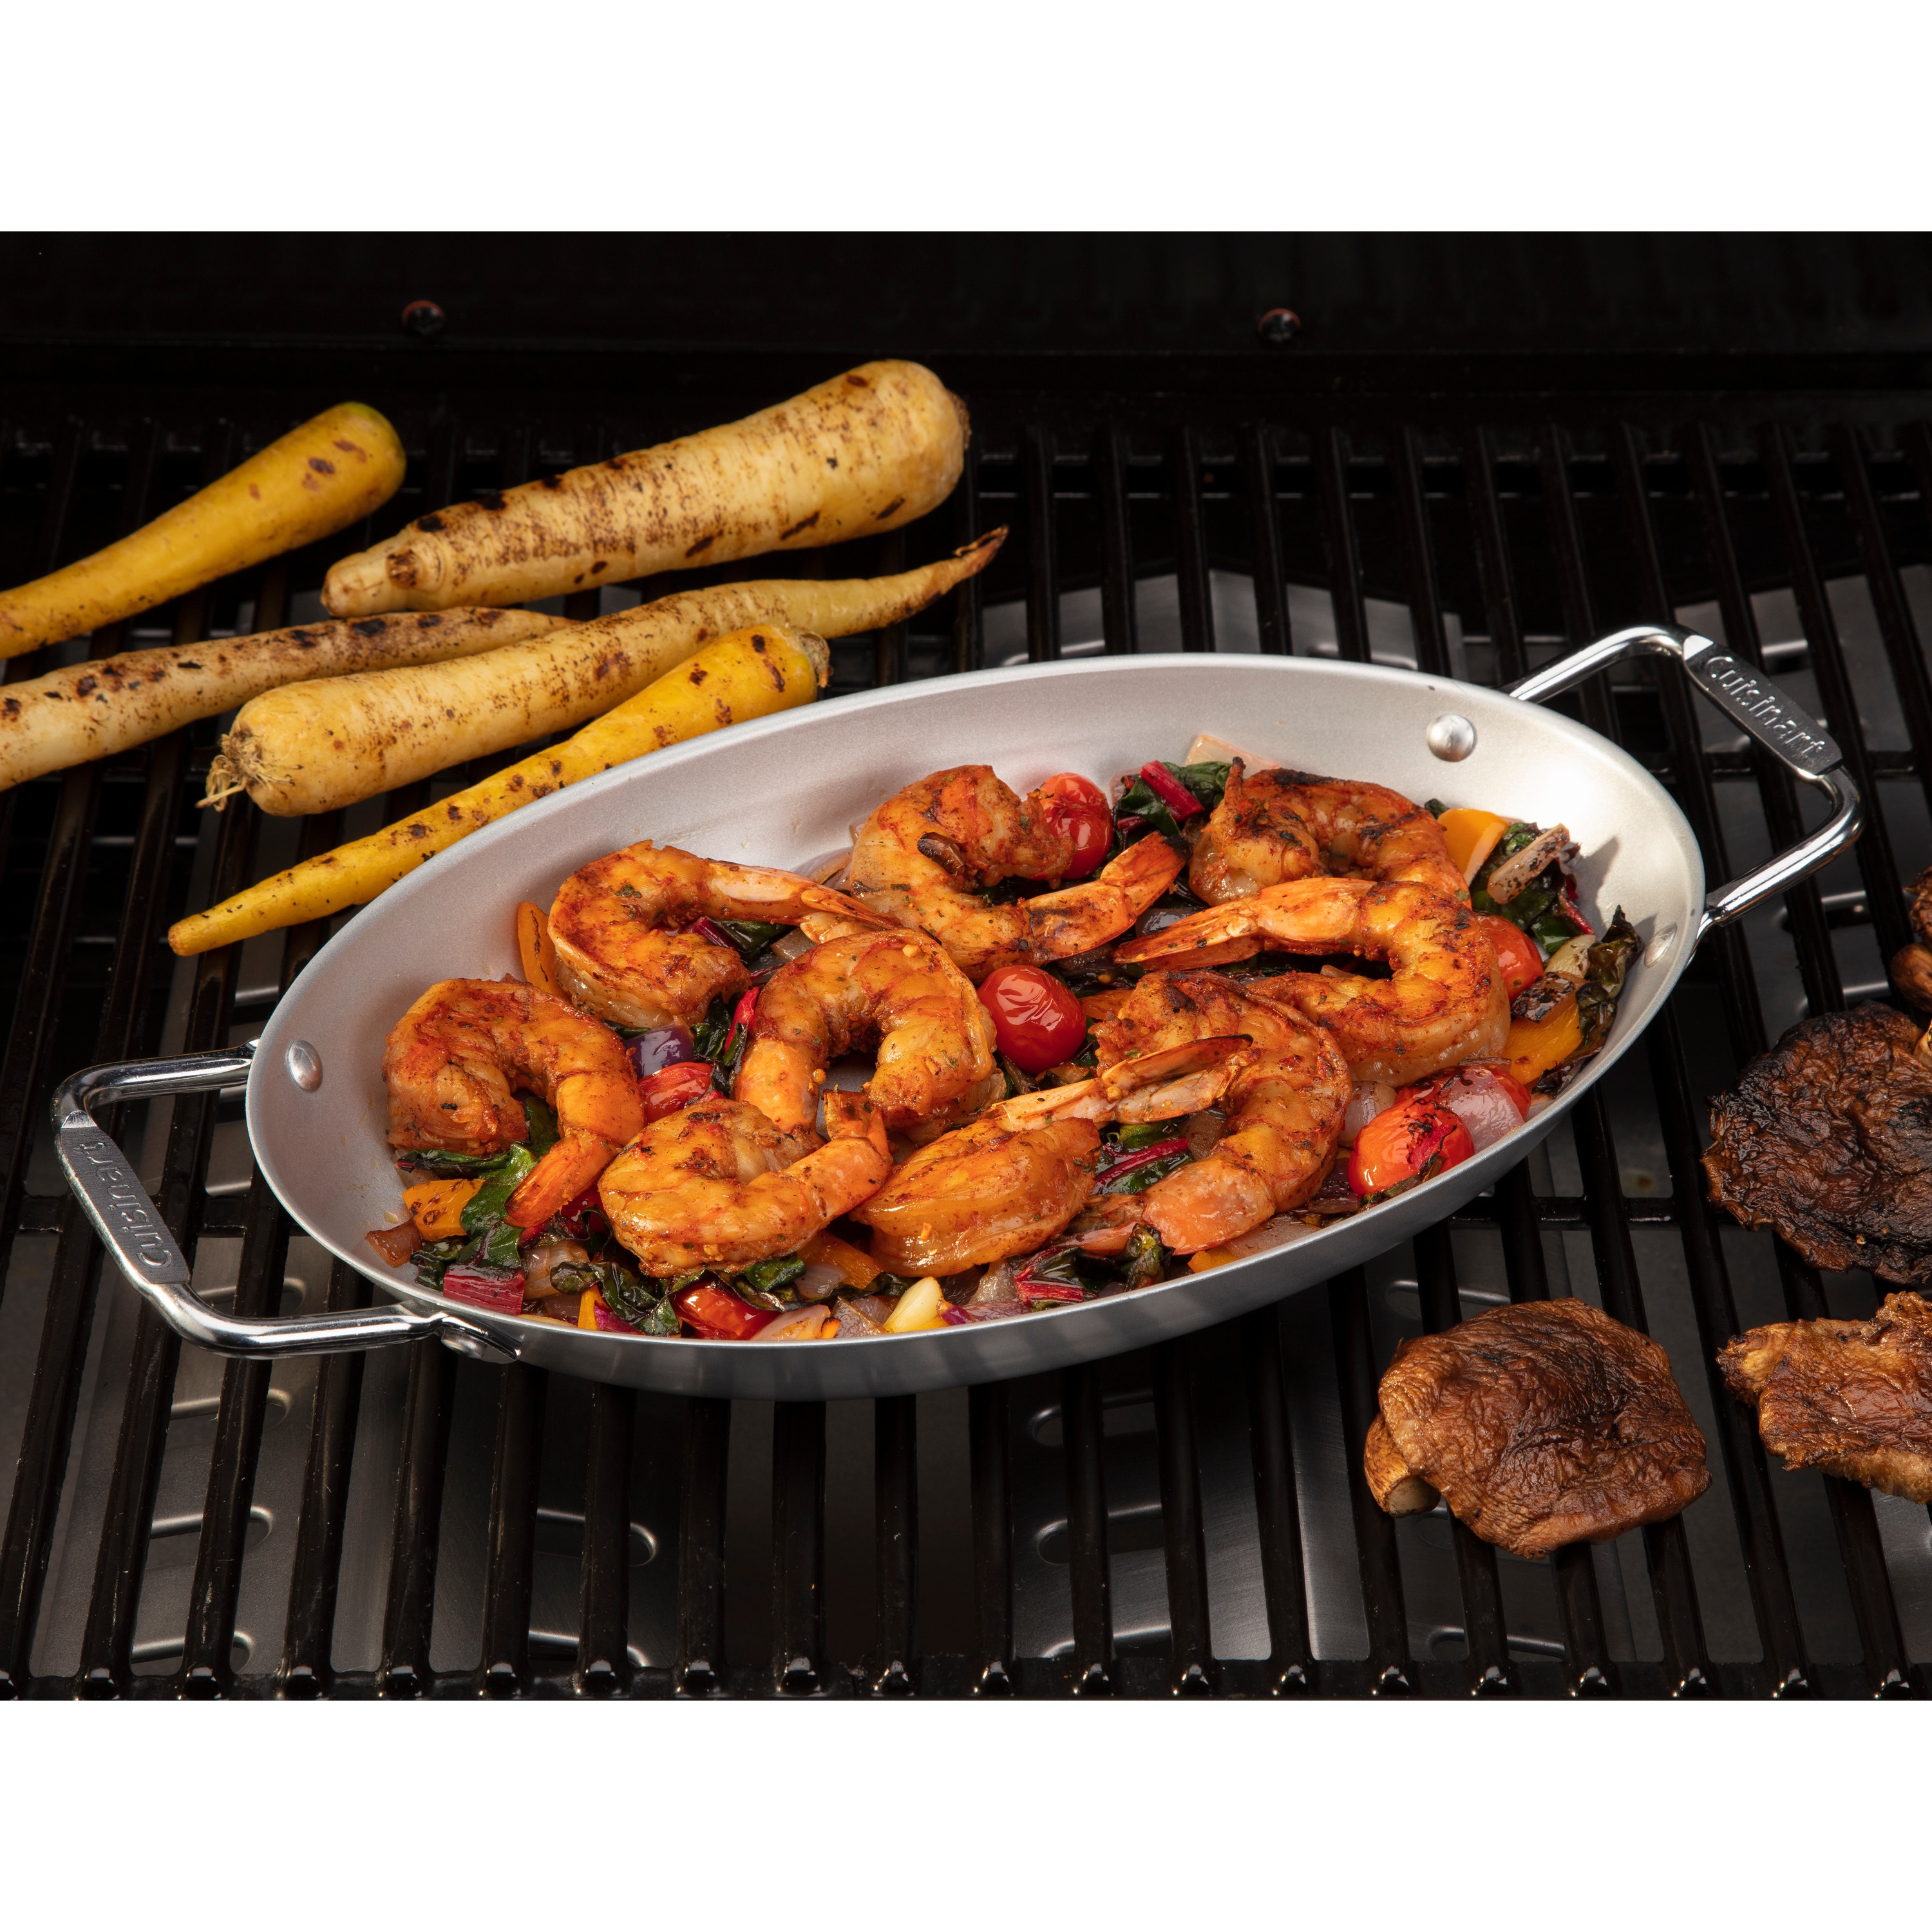 Cuisinart 10-In. Cast Iron Griddle Pan for Grill, Campfire, Stovetop, or  Oven - Non-Stick, Black - Ideal for Practical and Functional Cooking in the Grill  Cookware department at